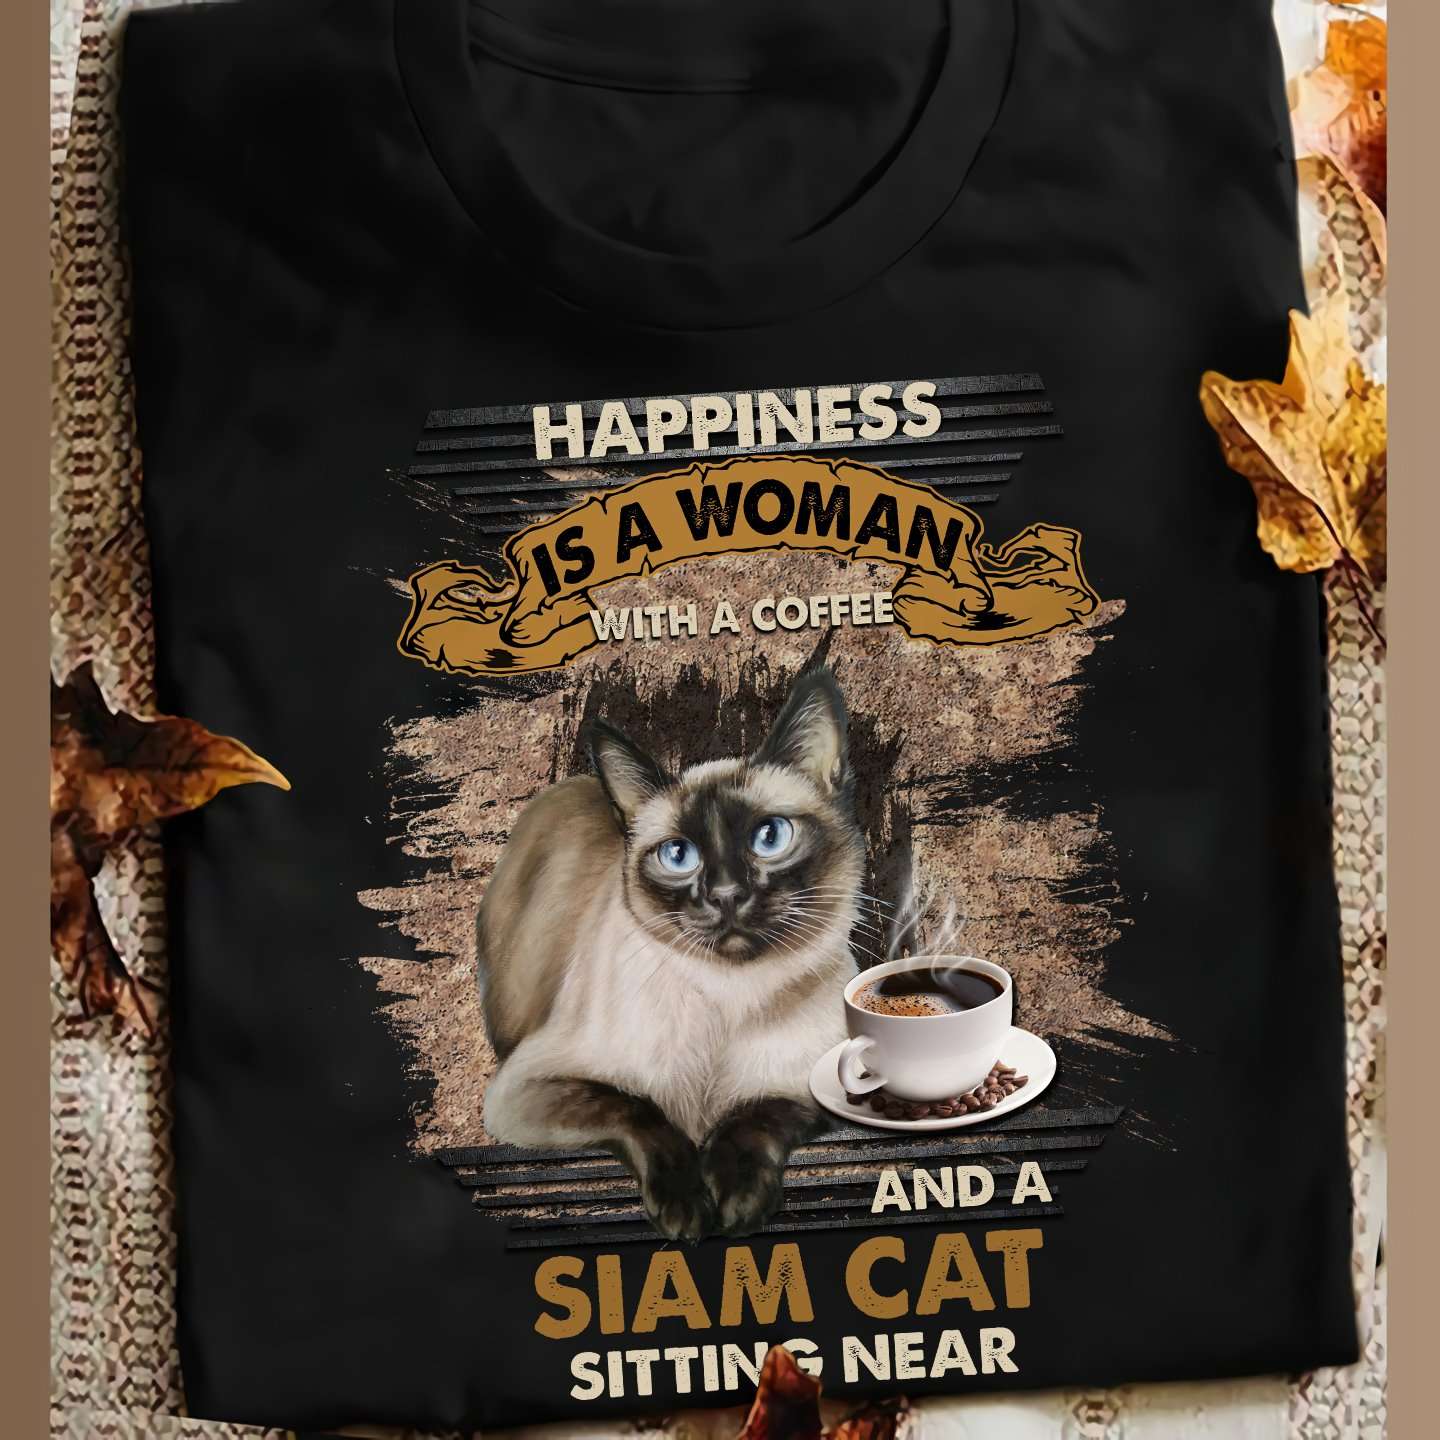 Siam Cat Coffee - Happiness is a woman with a coffee and a siam cat sitting near